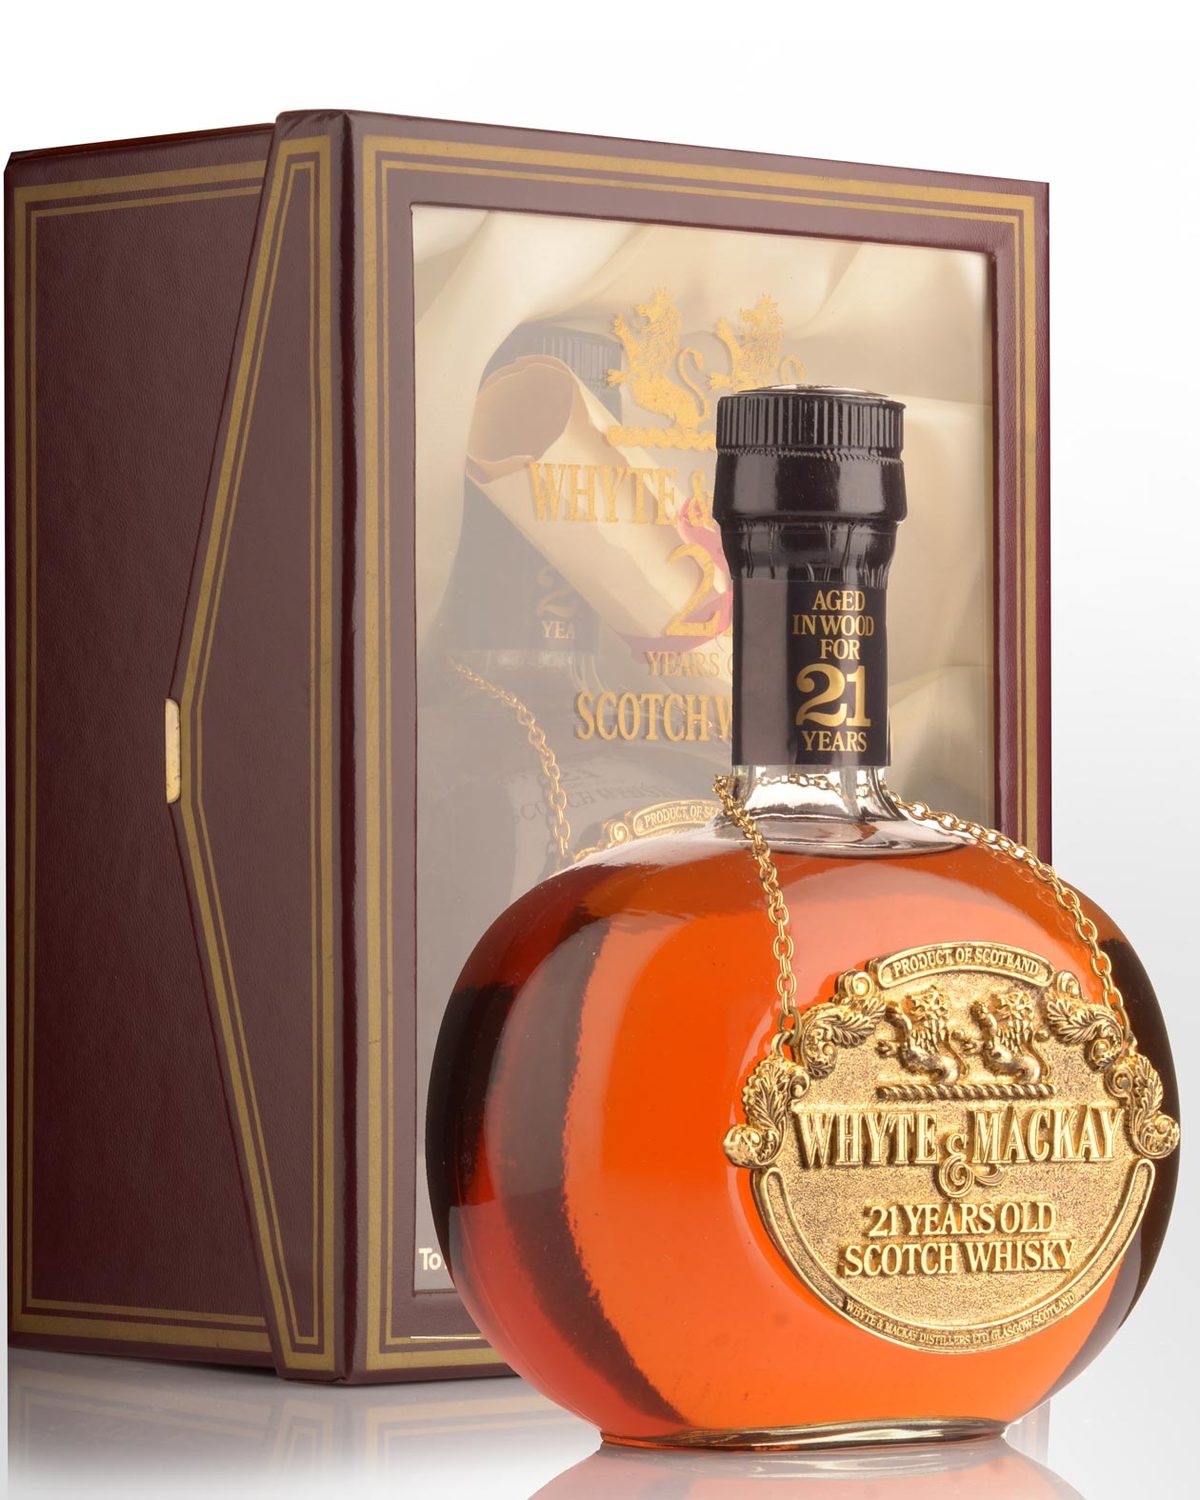 Whyte & Mackay 21 Year Old Blended Scotch Whisky (750ml) | Nicks